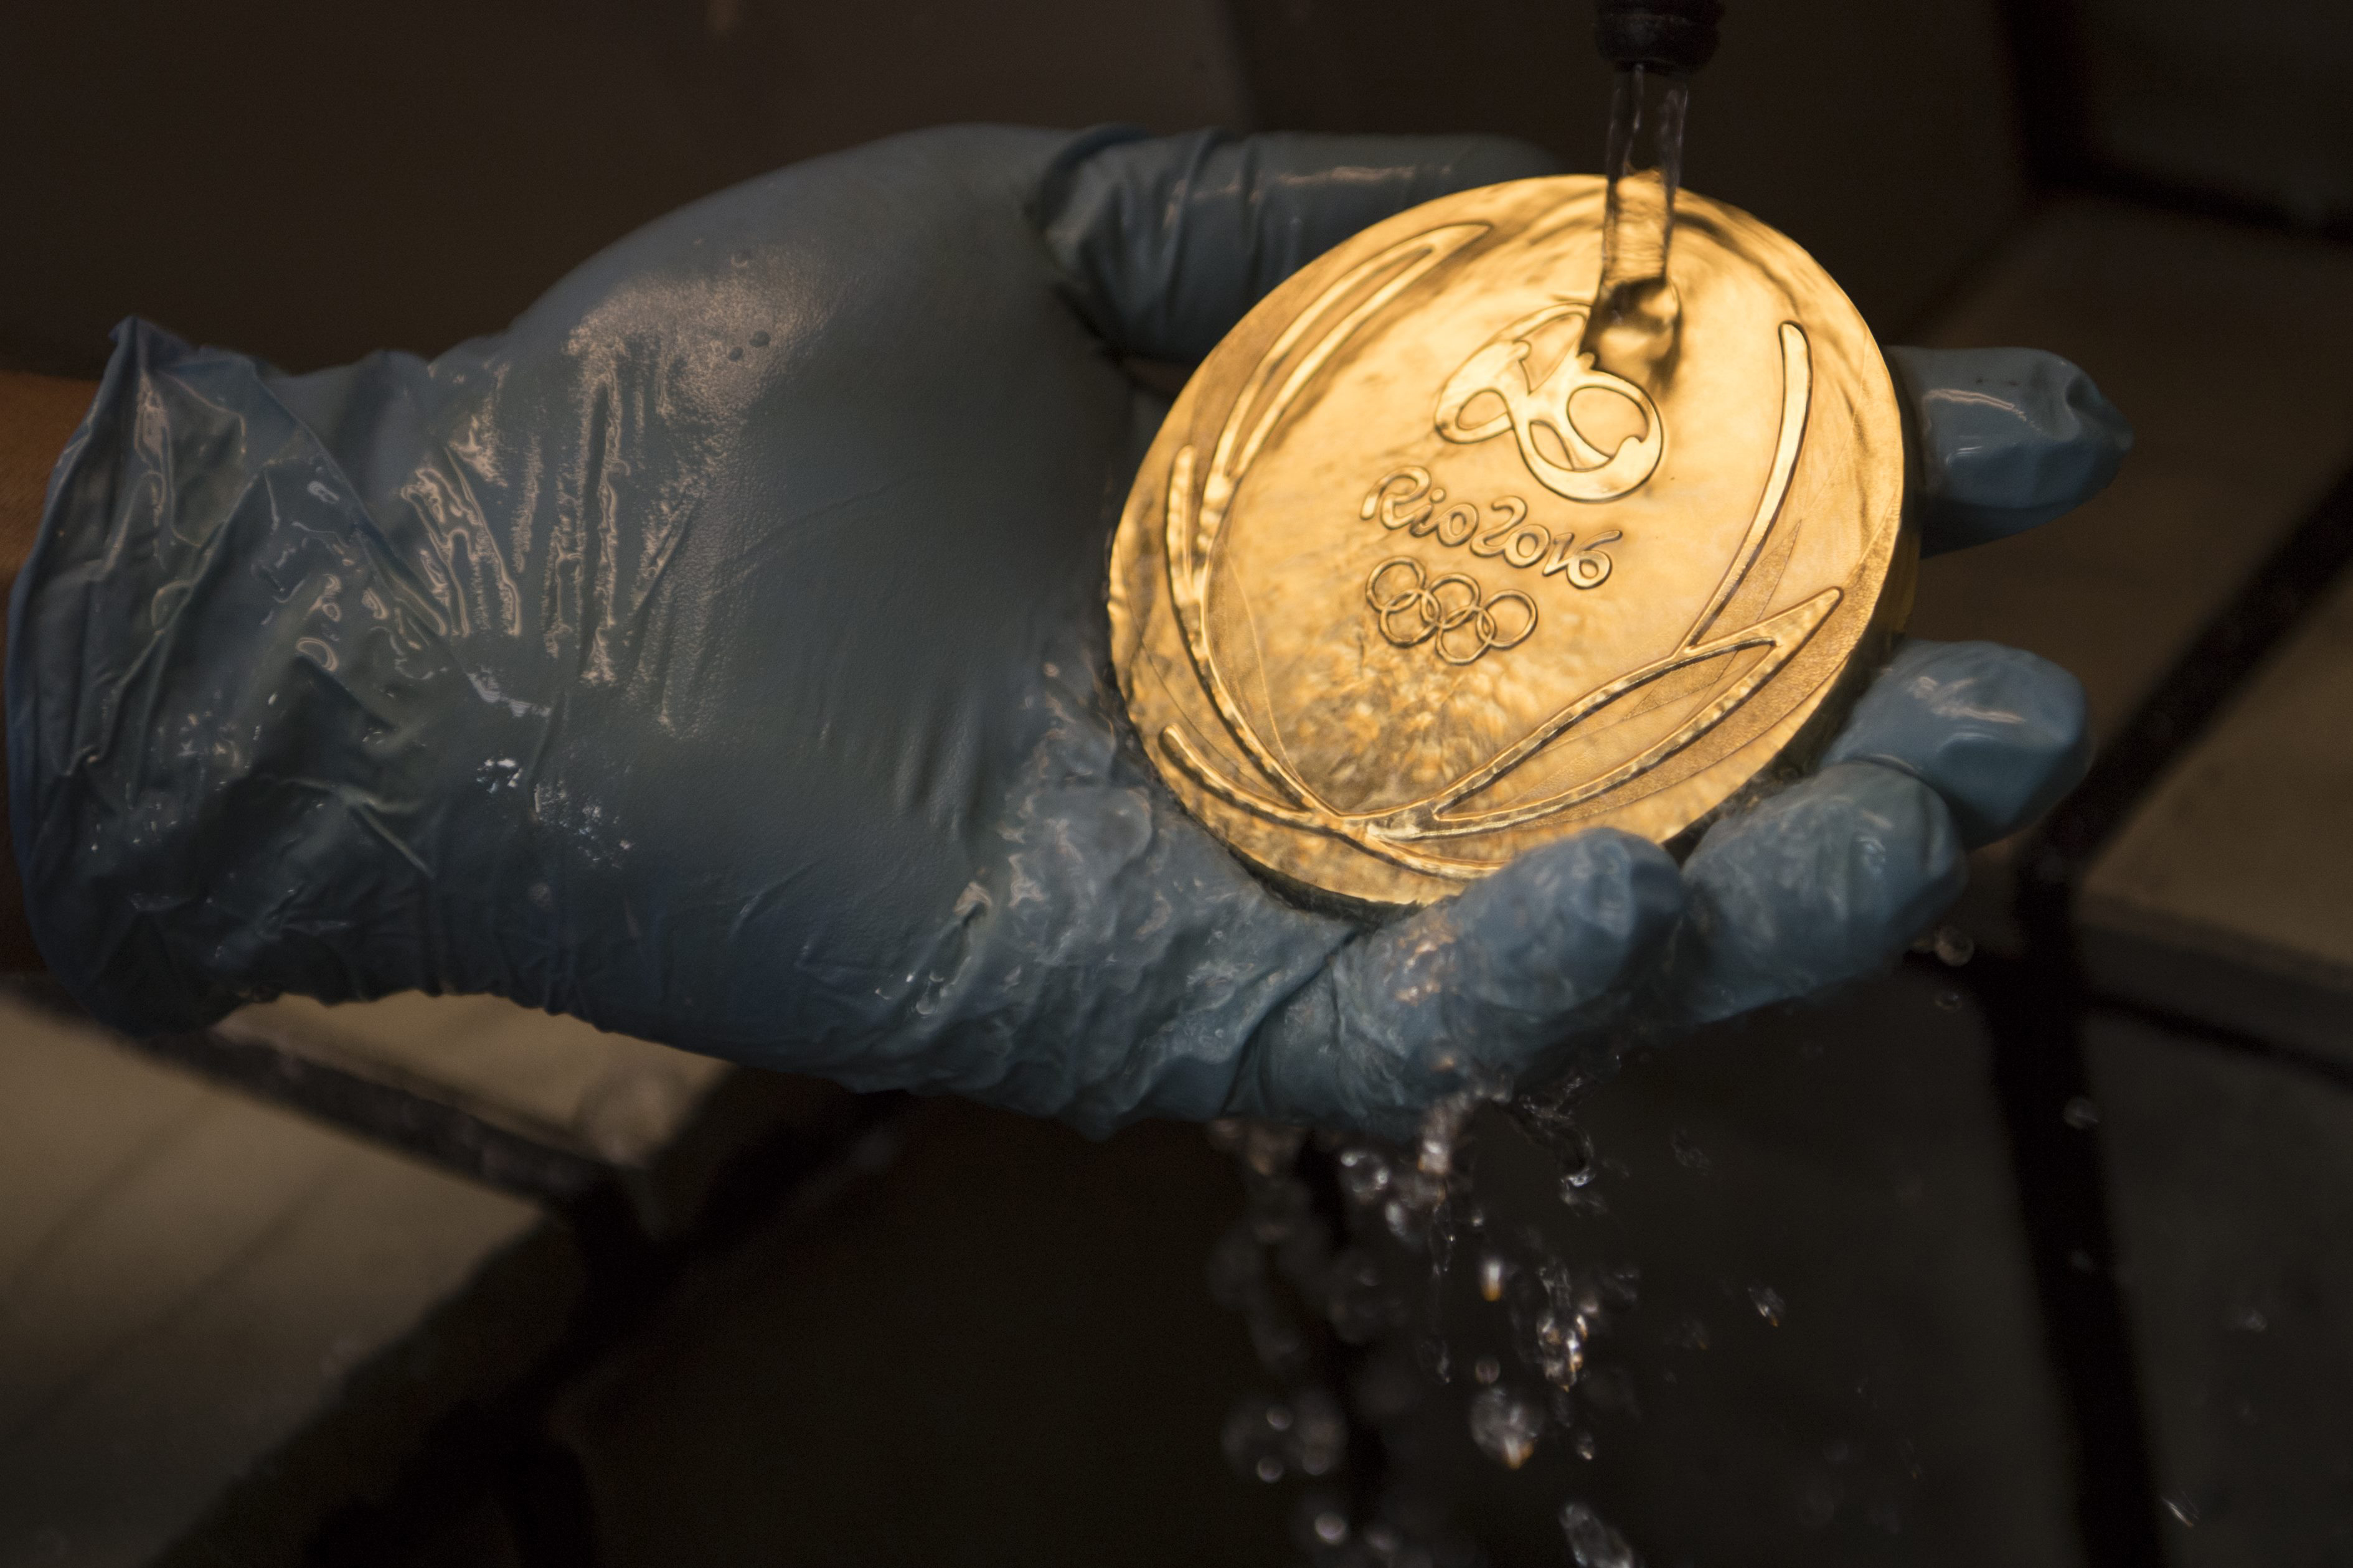 How much gold is there in a olympic gold medal How Much Is A Gold Medal Worth In 2016 The Rio Olympics Will Hand Out More Than 800 Of Them